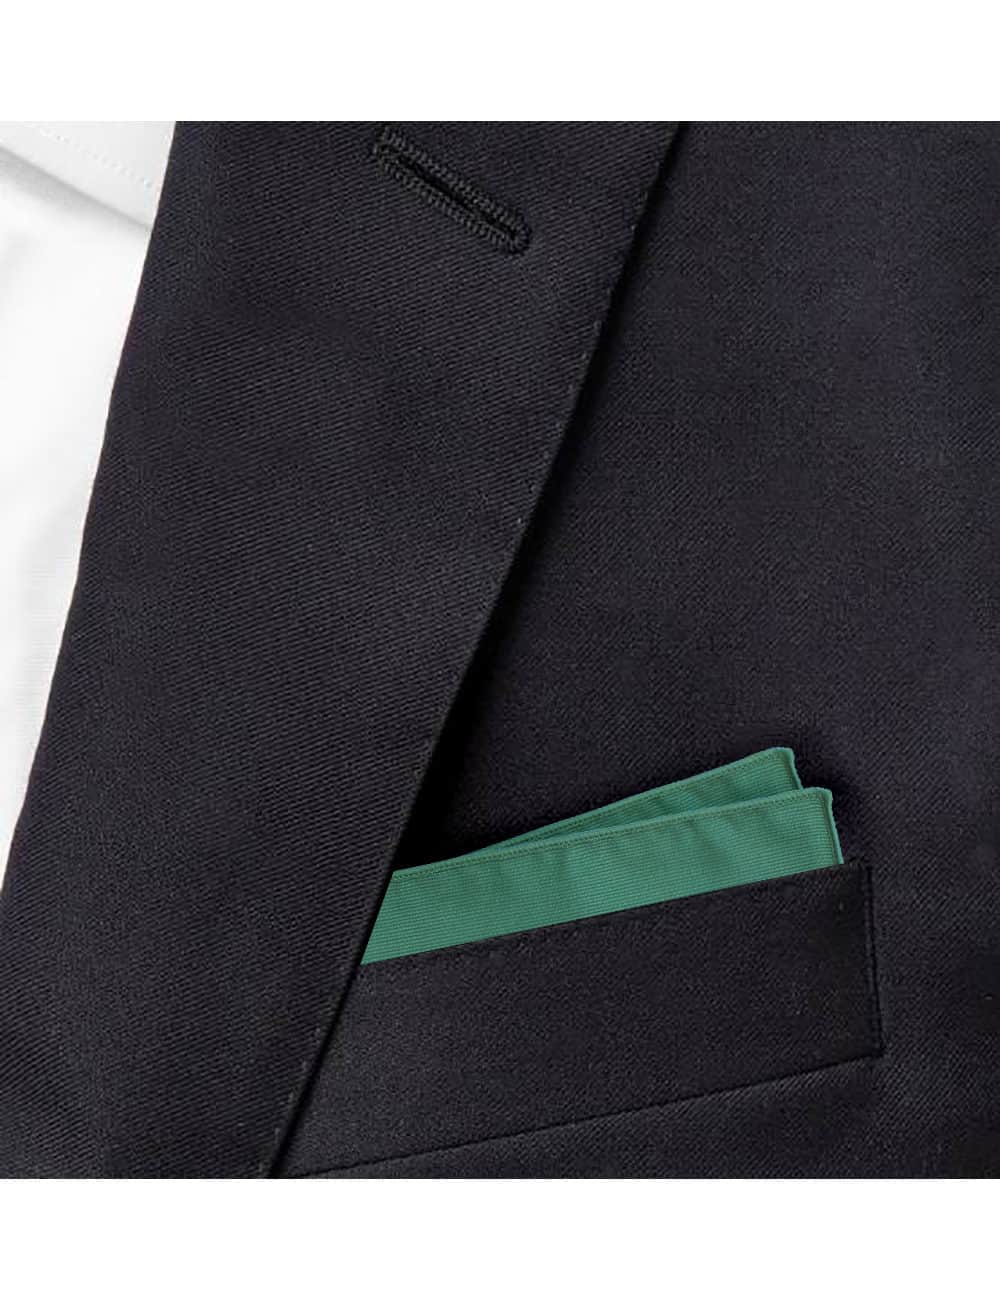 Solid Green Woven Pocket Square PSQ22.7